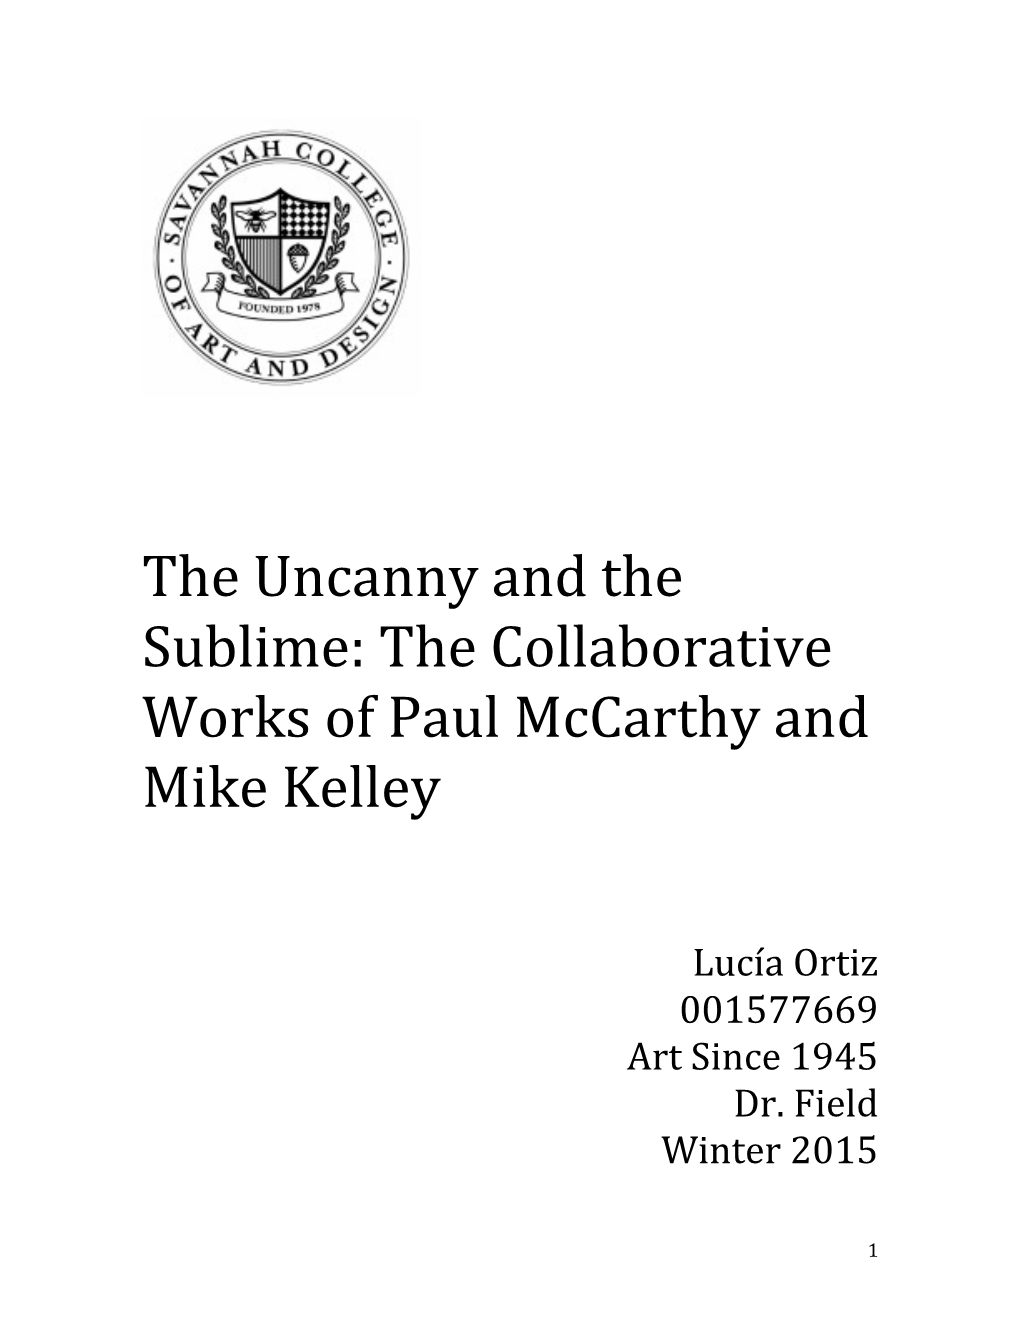 The Uncanny and the Sublime: the Collaborative Works of Paul Mccarthy and Mike Kelley